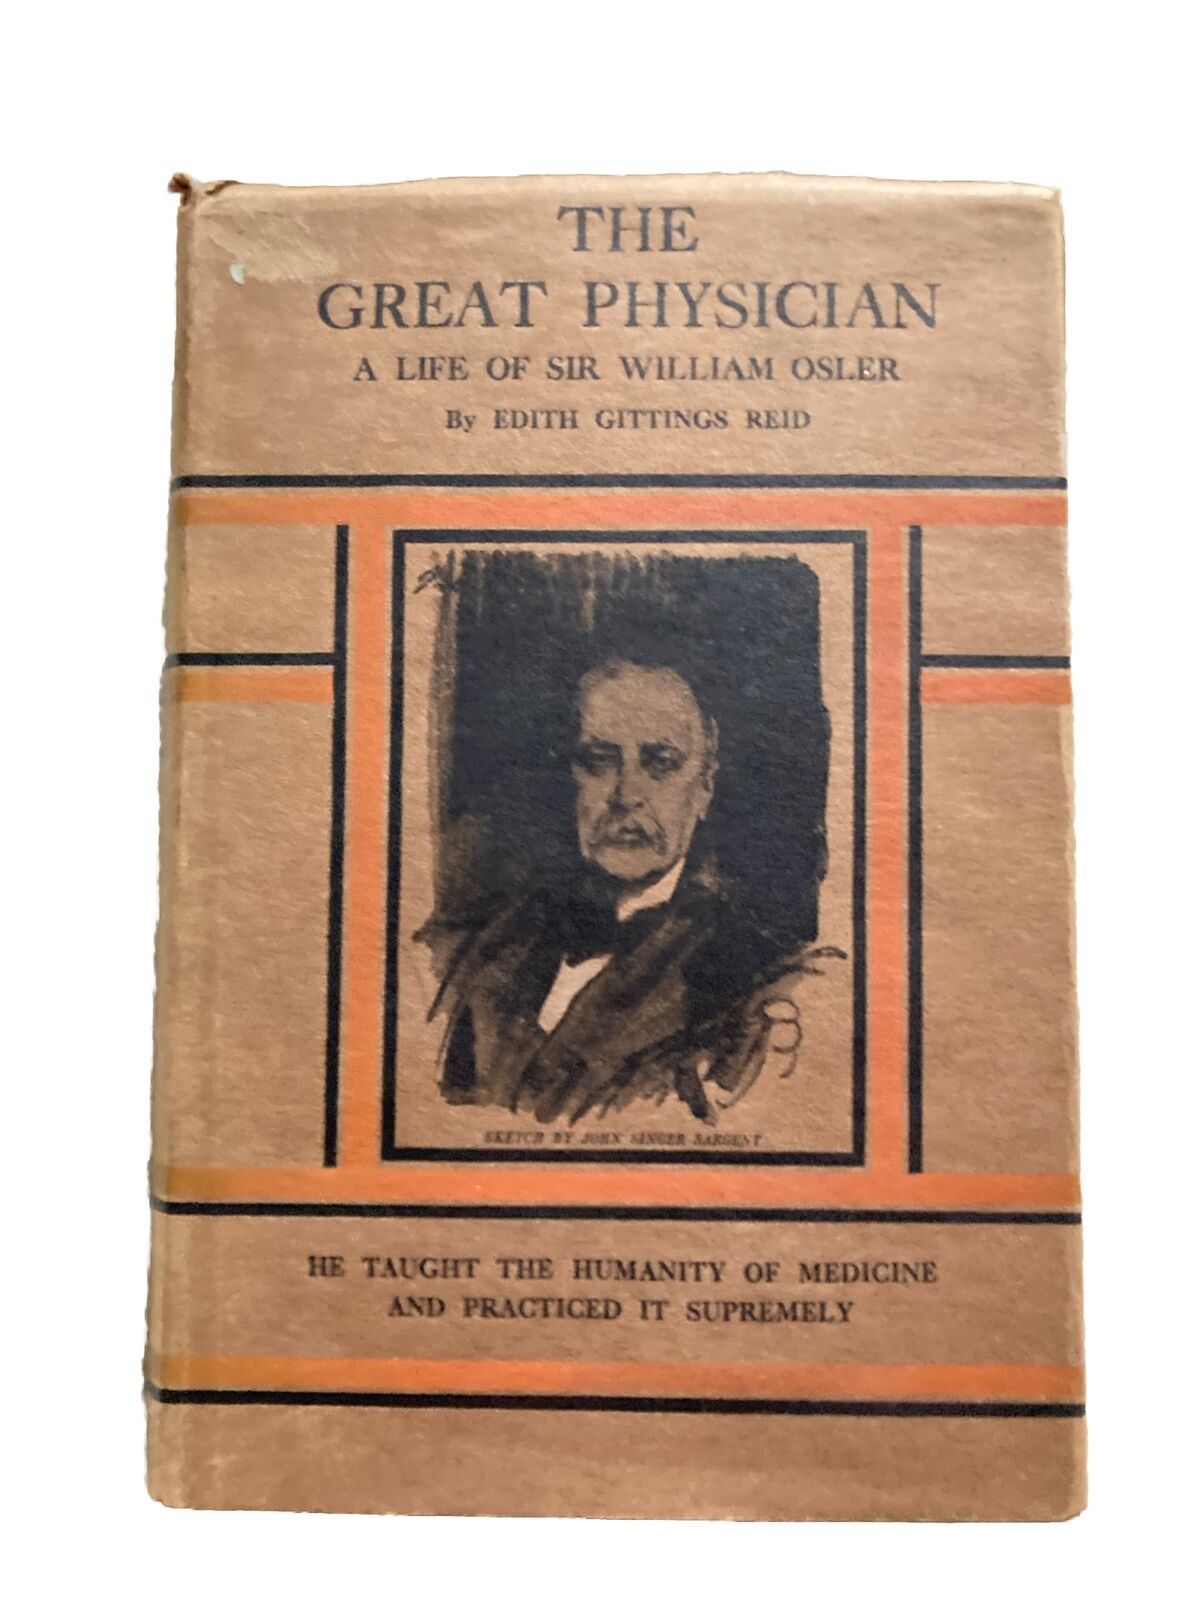 Great Physician: Life of Sir William Osler by Edith G Reid Published 1931 Oxford